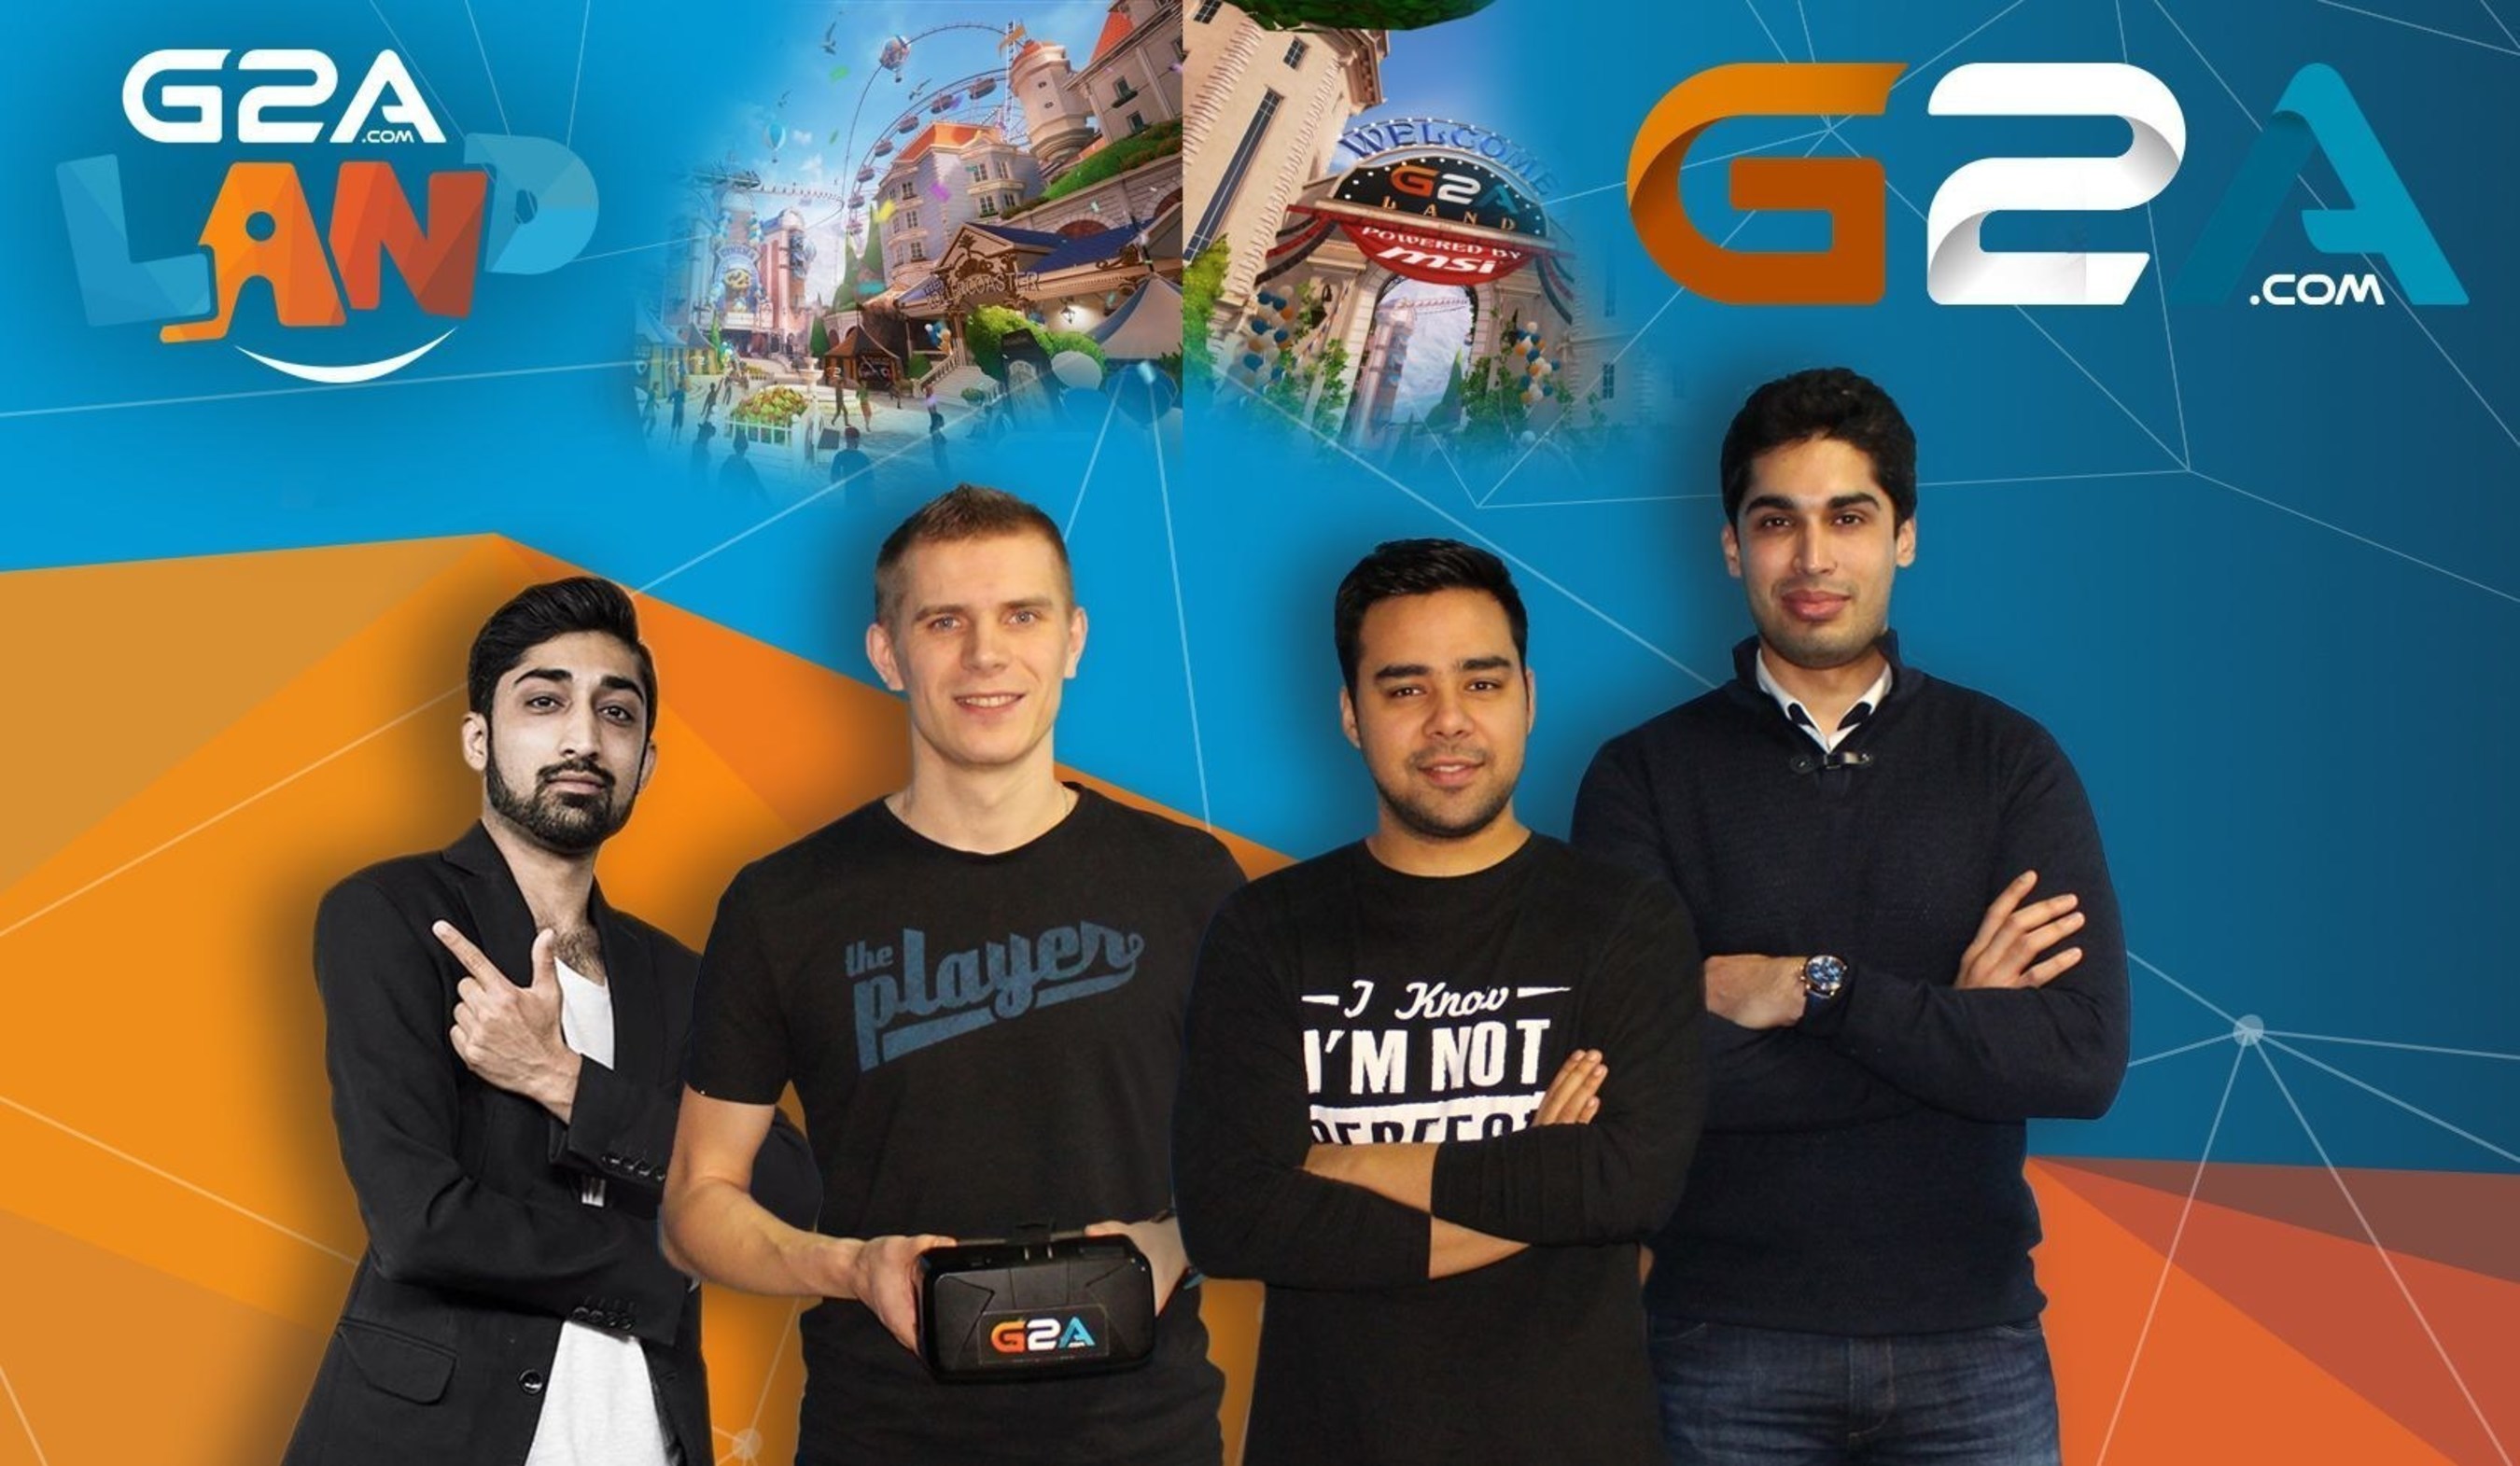 G2A's India Team with the Head of Oculus and G2A Land creator, left to right: Rohit Dahda - Head of India at G2A, Marcin Kryszpin - Head of Oculus, Rahul Bali - Marketing Specialist India, Arjun Anand - Sales Specialist (PRNewsFoto/G2A.com) (PRNewsFoto/G2A.com)